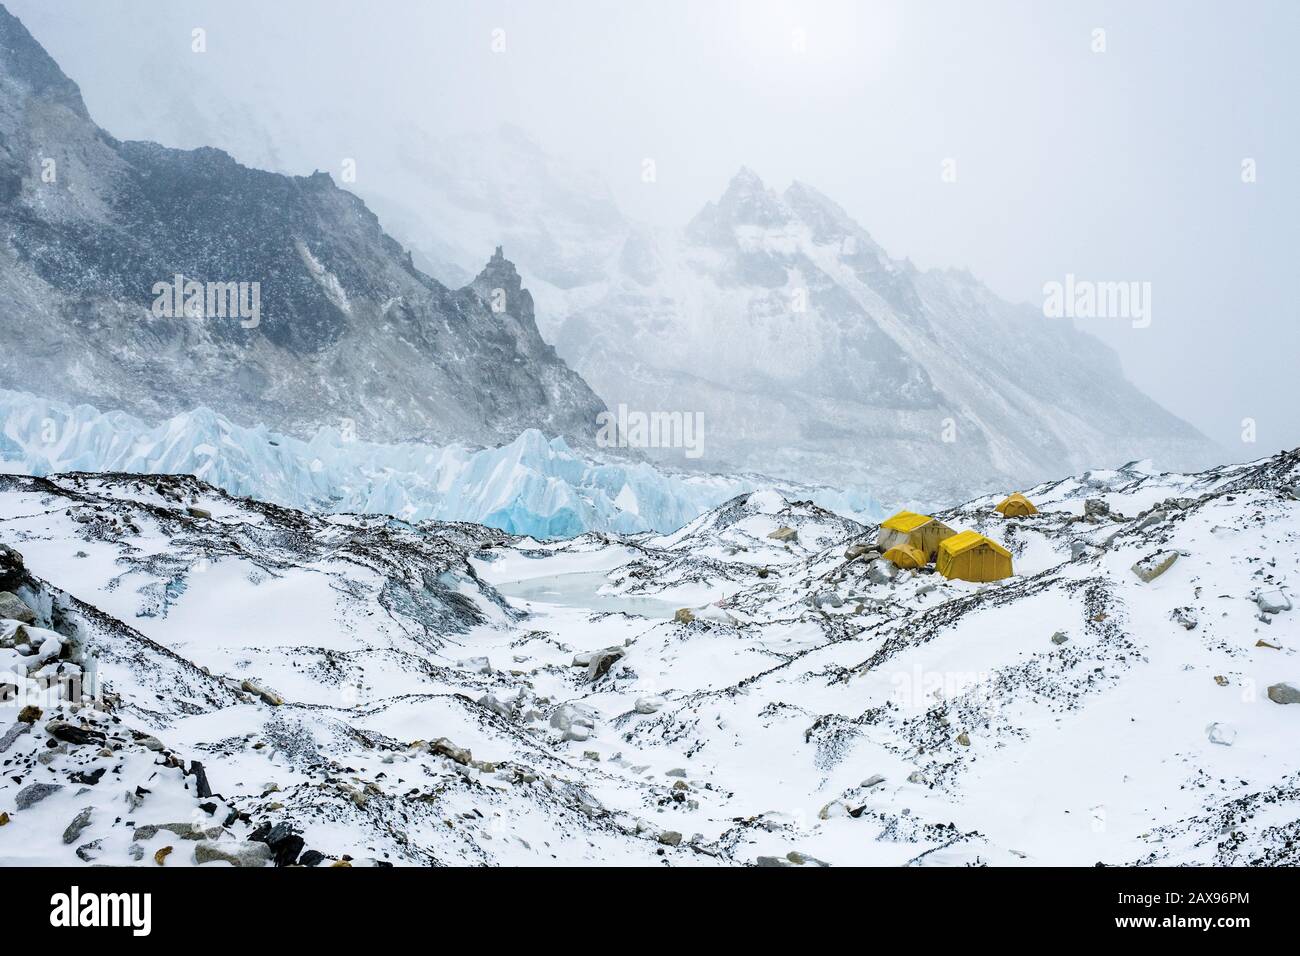 An Everest expedition base camp  on the Khumbu Glacier in the Nepal Himalayas Stock Photo